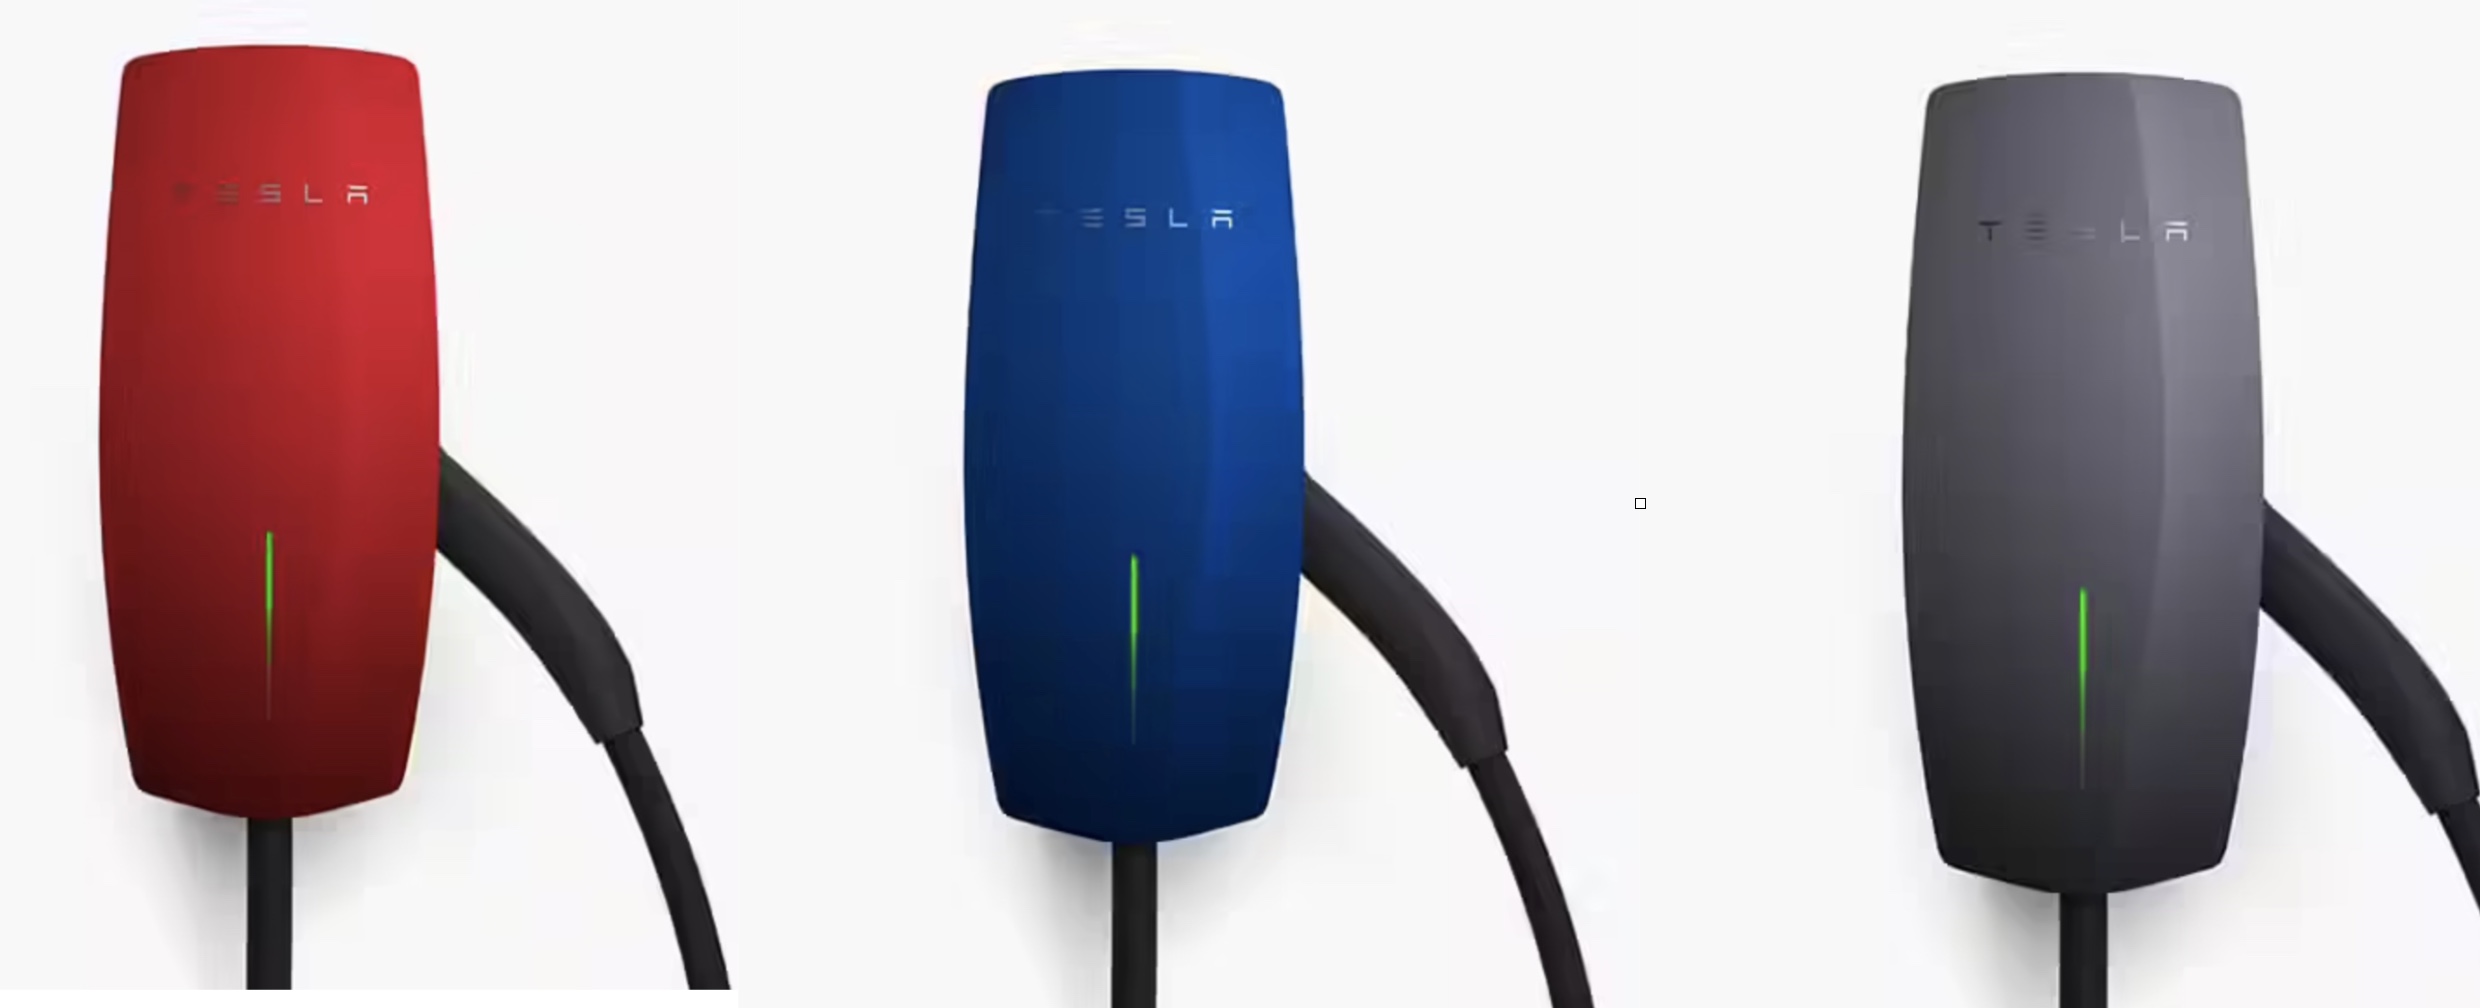 Tesla Gen 3 Wall Connector – JET Charge